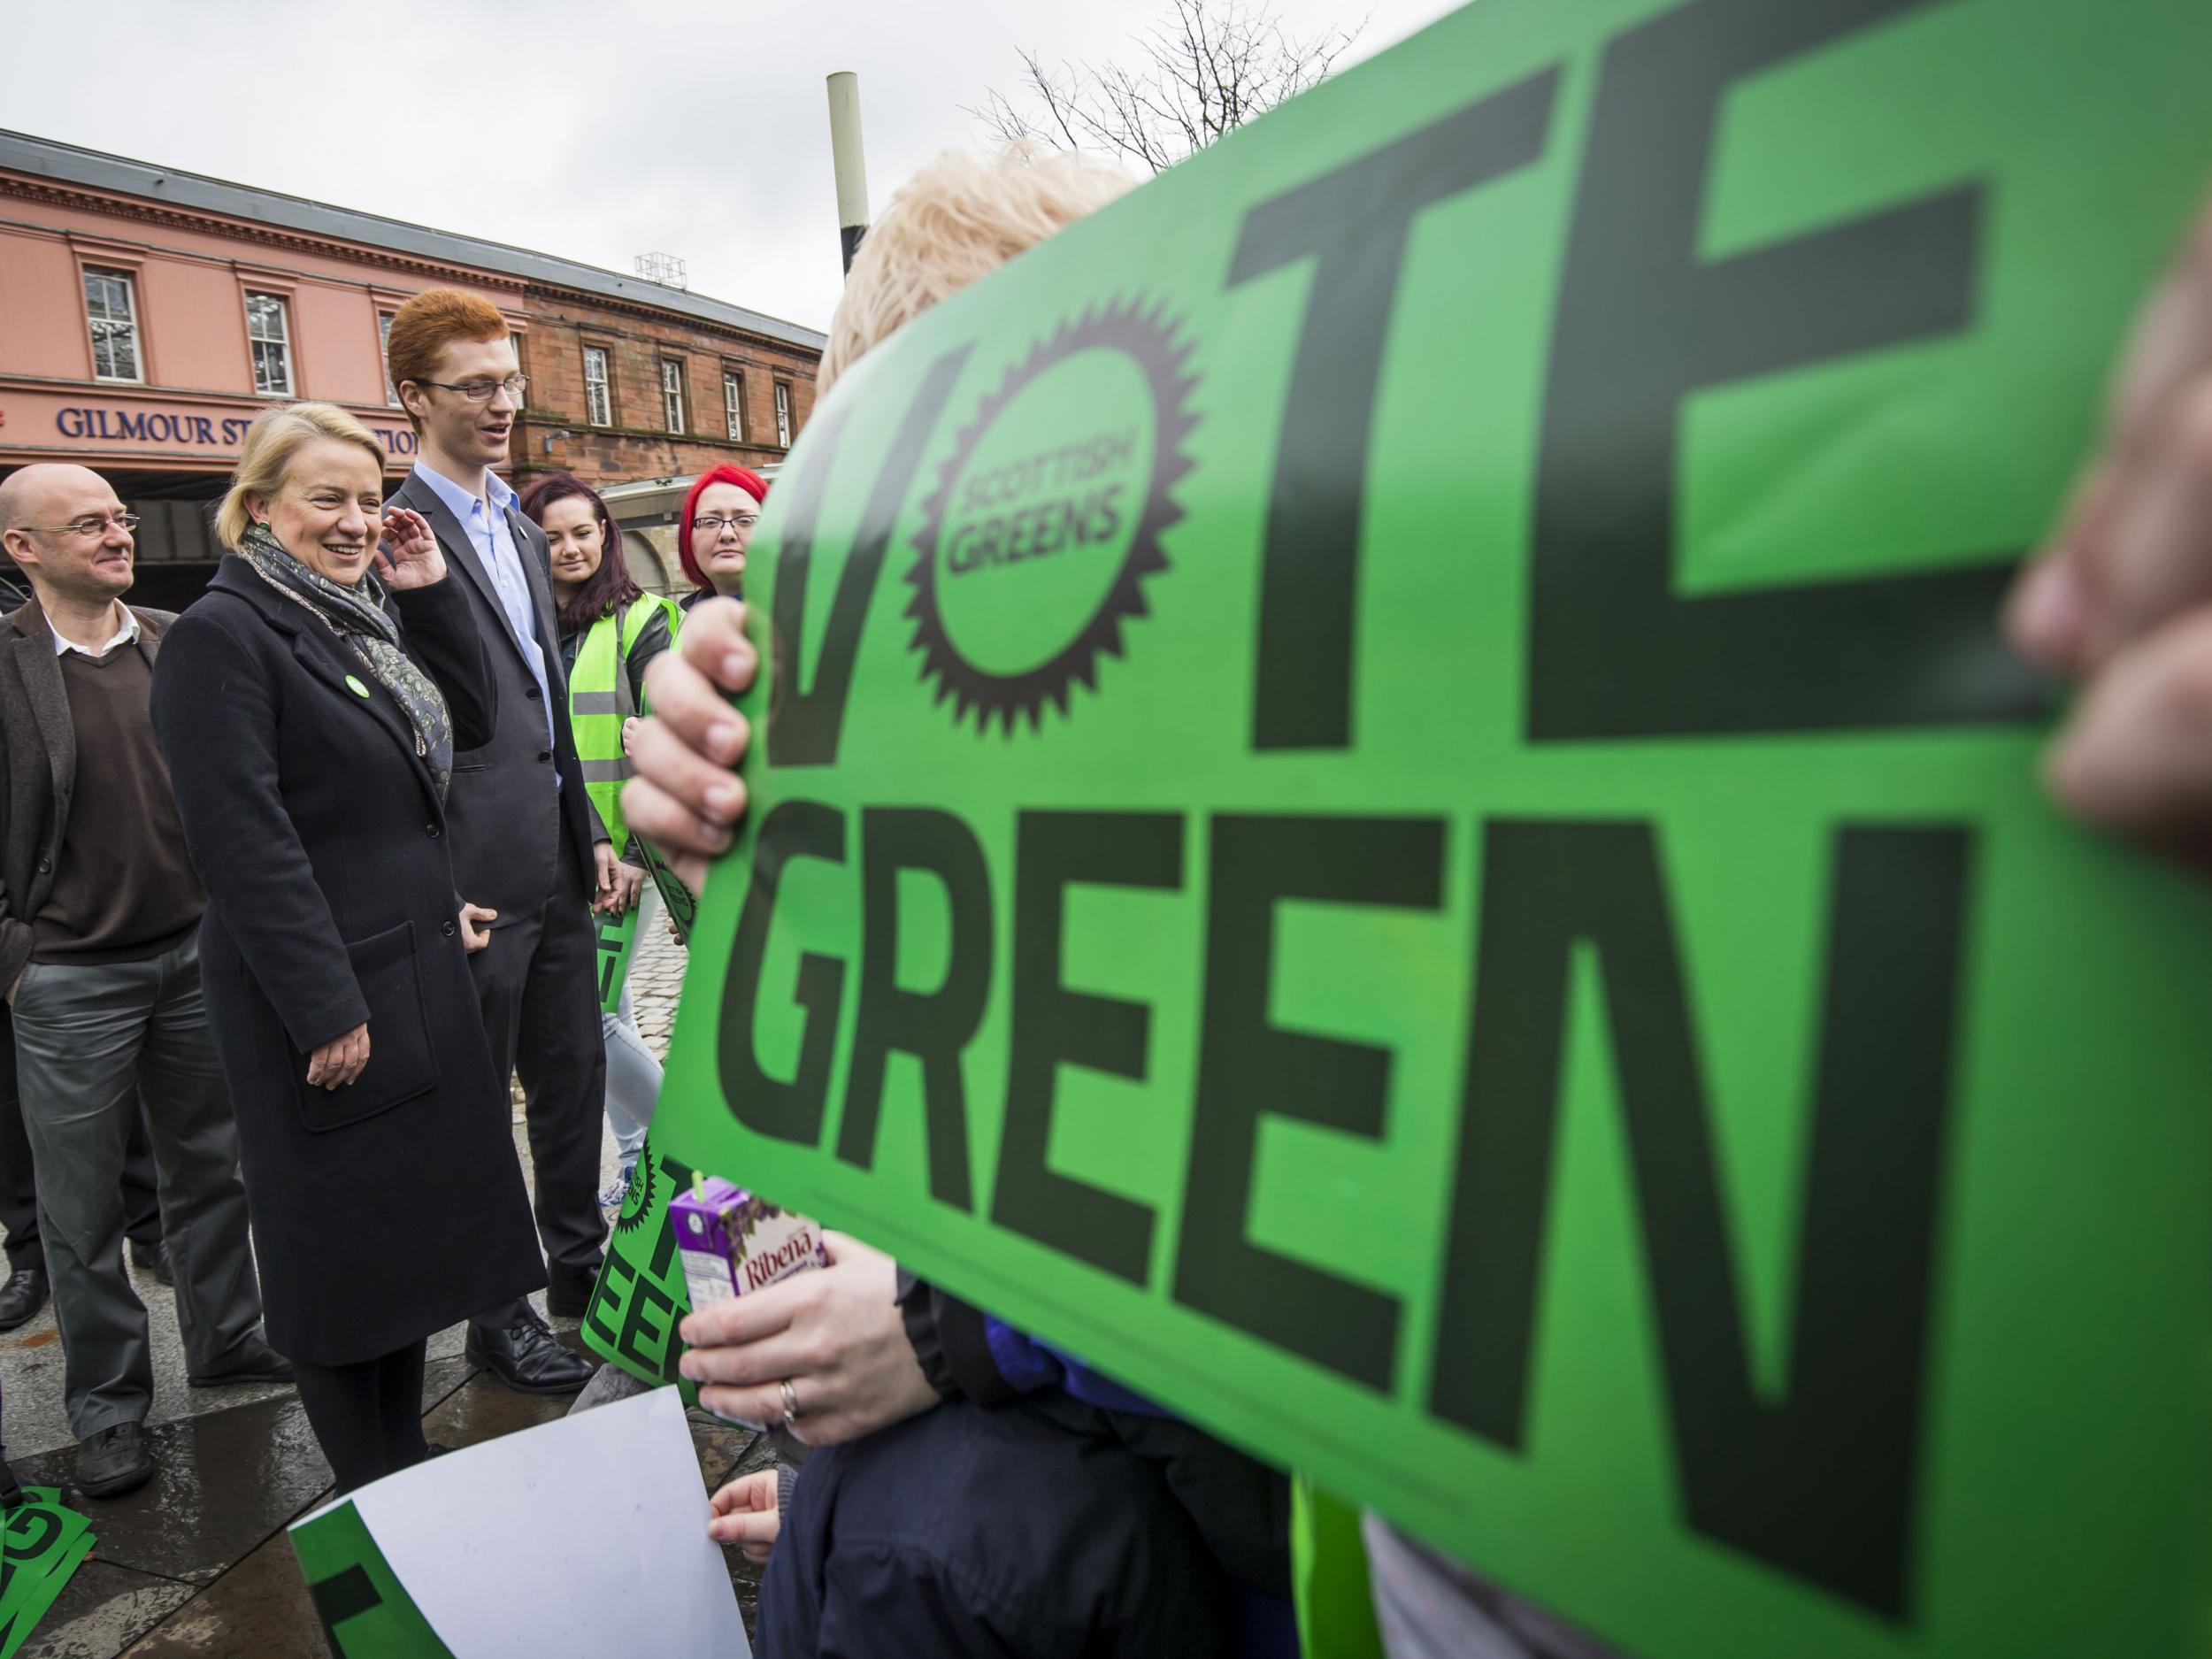 England and Wales Green Party leader Natalie Bennett, Scottish Greens co-convener Patrick Harvie, and West of Scotland Candidate Ross Greer (right) launch the party's West of Scotland campaign